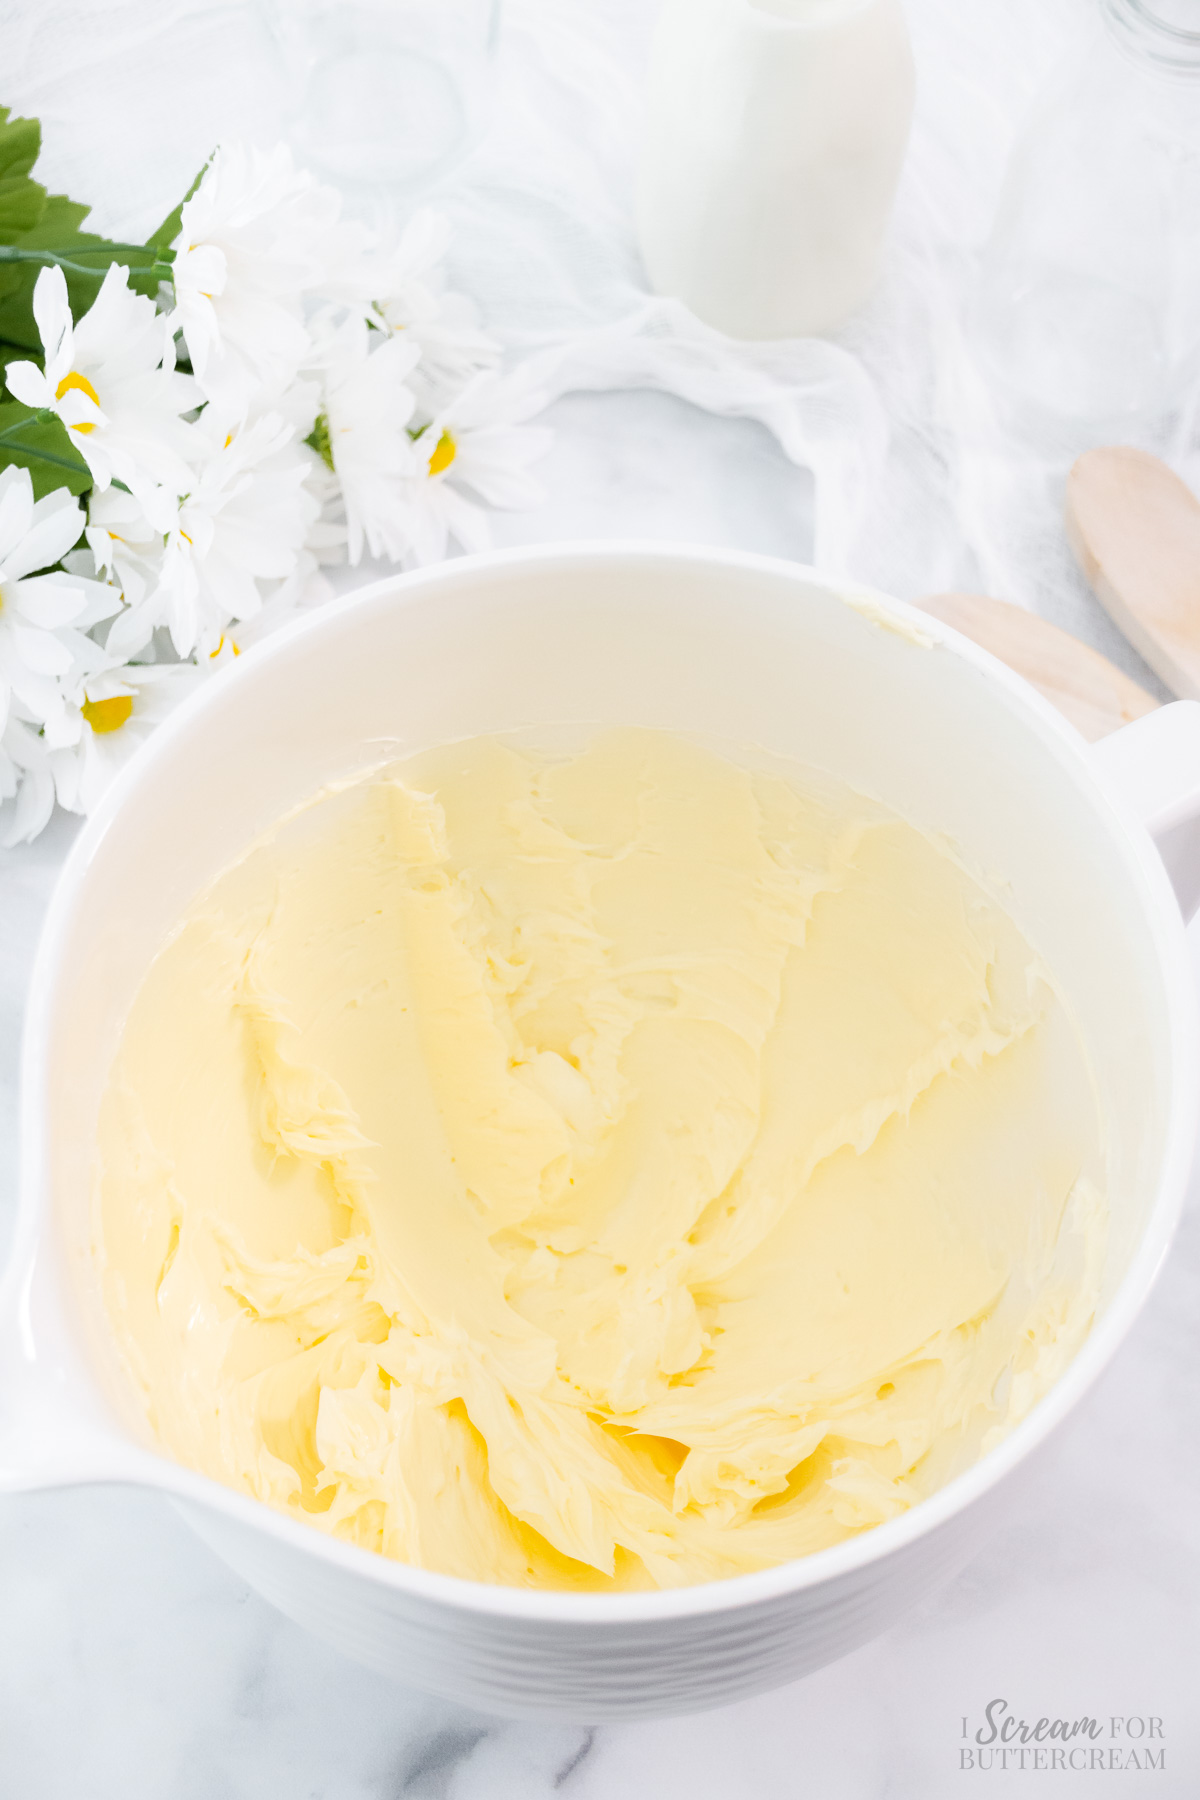 Mixed butter in a white mixing bowl.